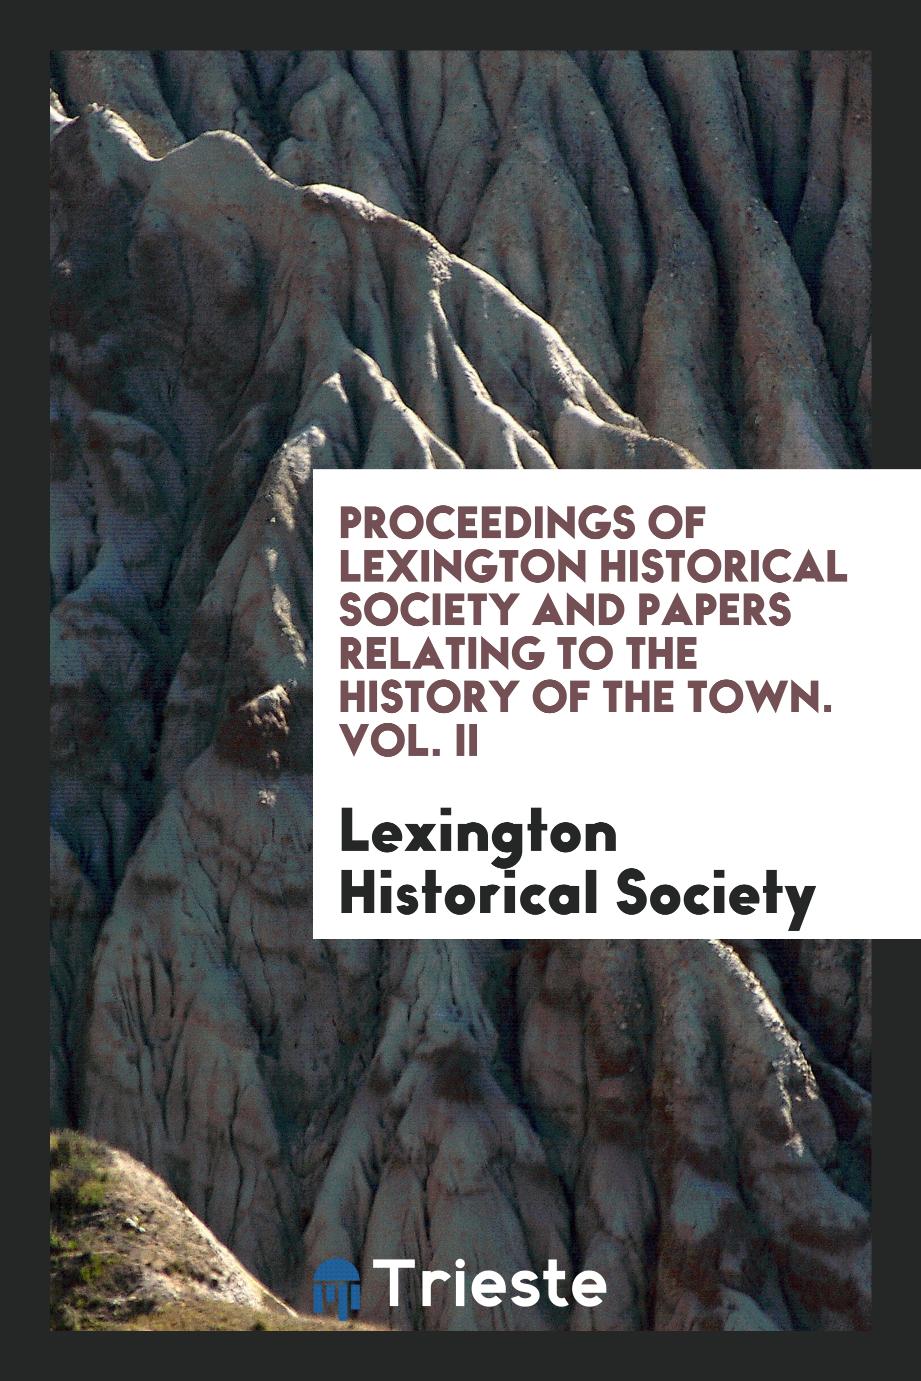 Proceedings of Lexington Historical Society and Papers Relating to the History of the Town. Vol. II